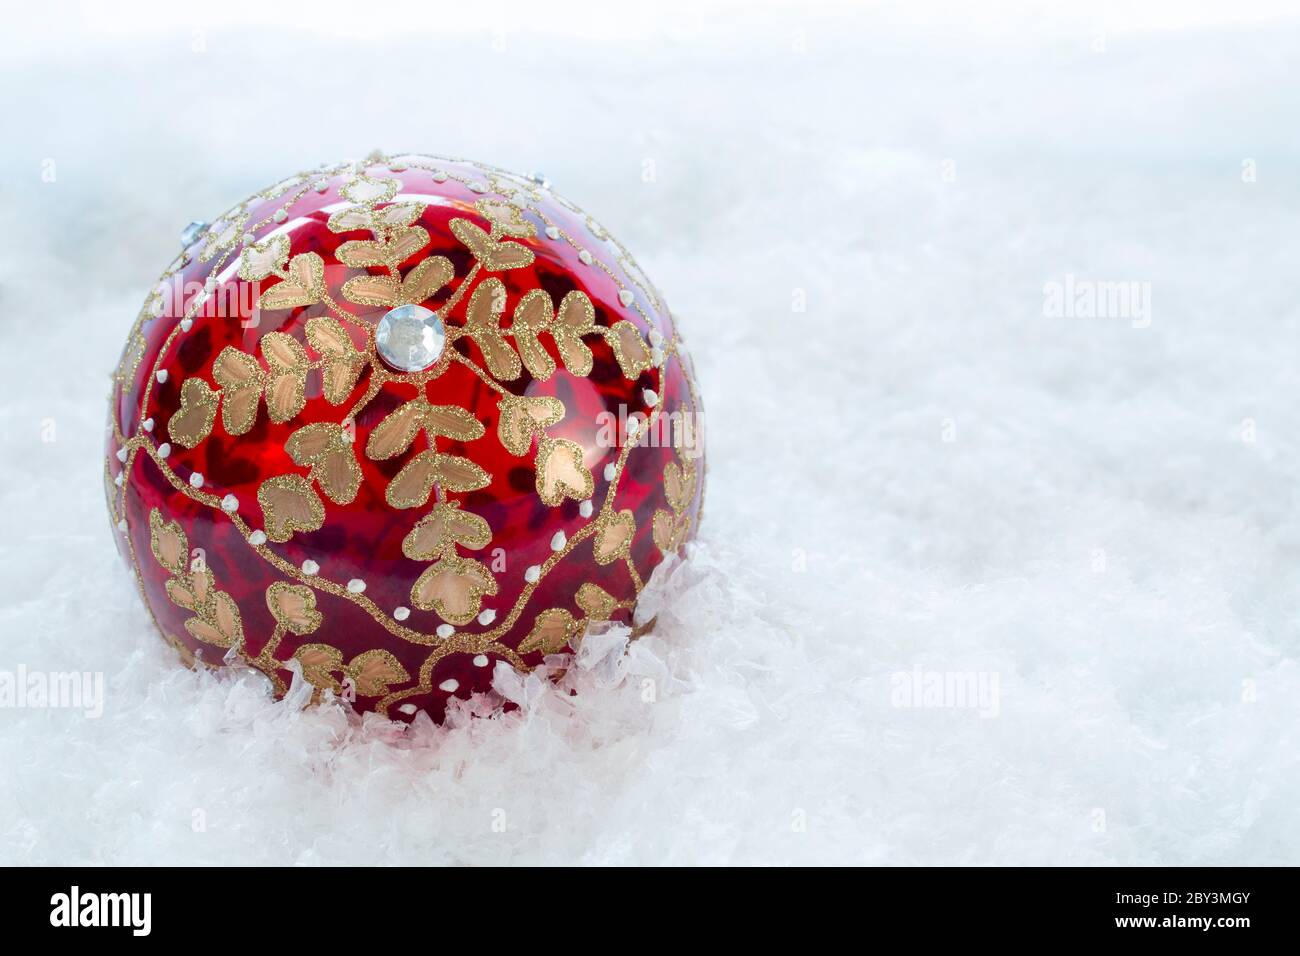 Ornate Christmas bauble on a snow covered  backdrop with copy space Stock Photo